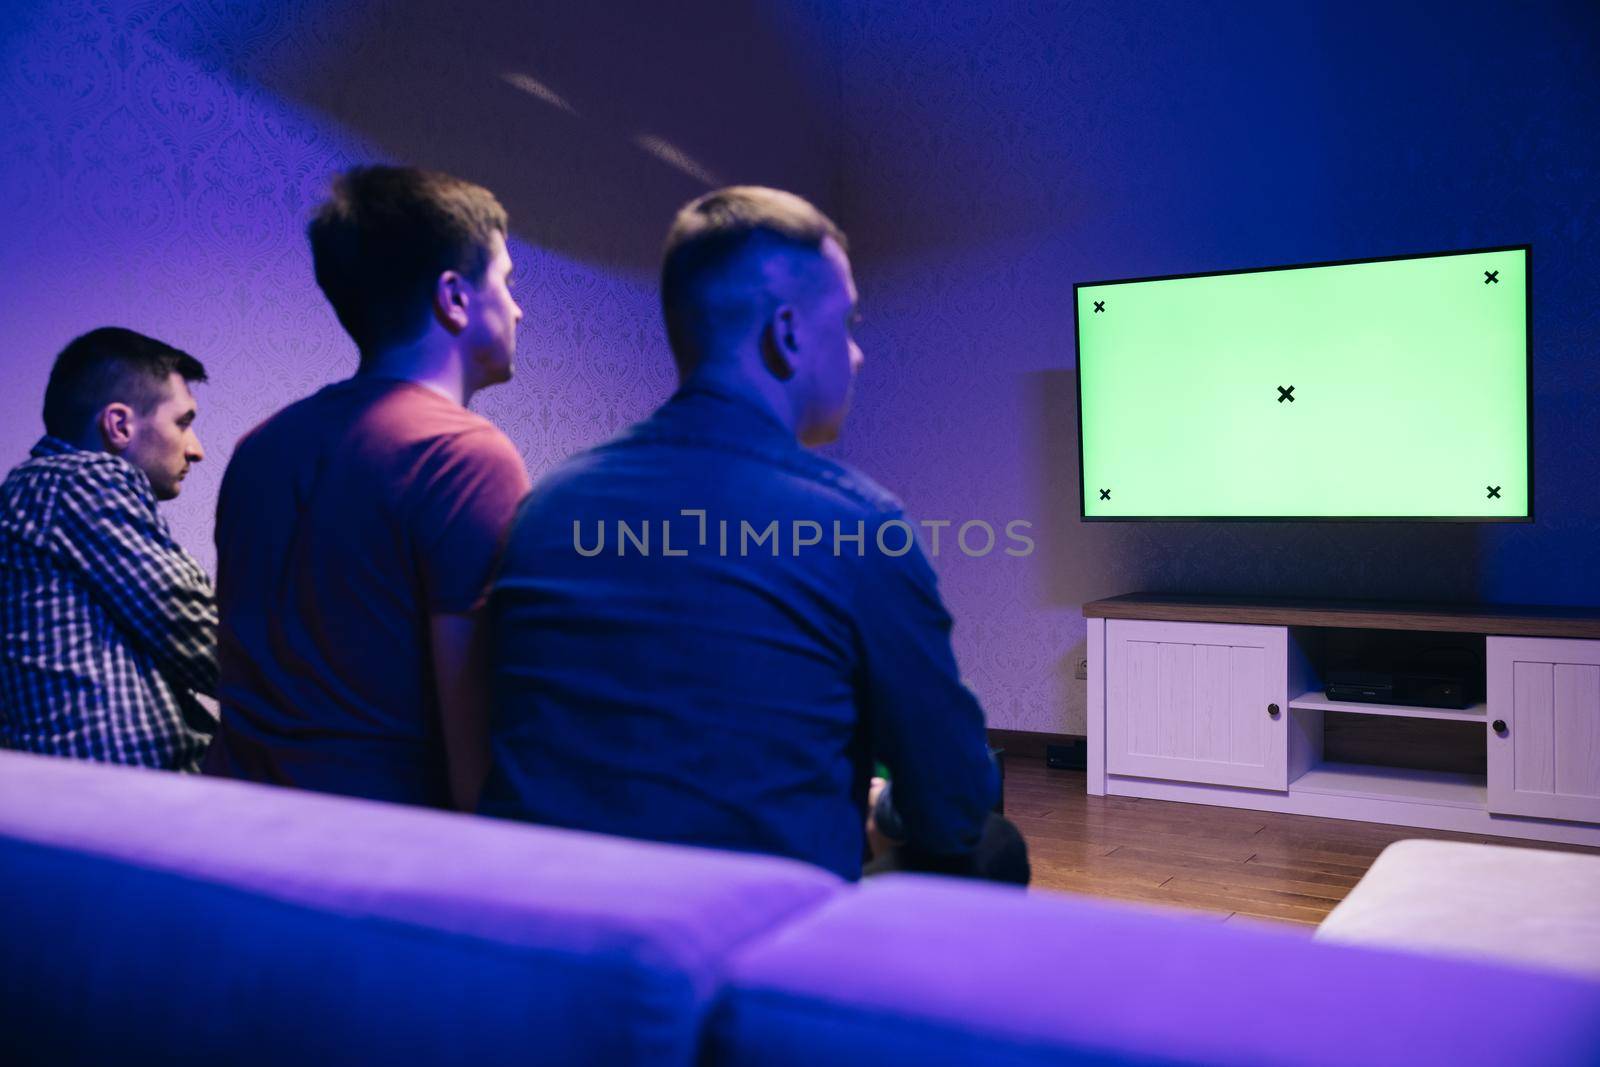 Back Shot of a Gamers Playing and Winning in Online Video Game on His console with Green Chroma Key Screen Personal TV. Cozy Evening at Home by uflypro